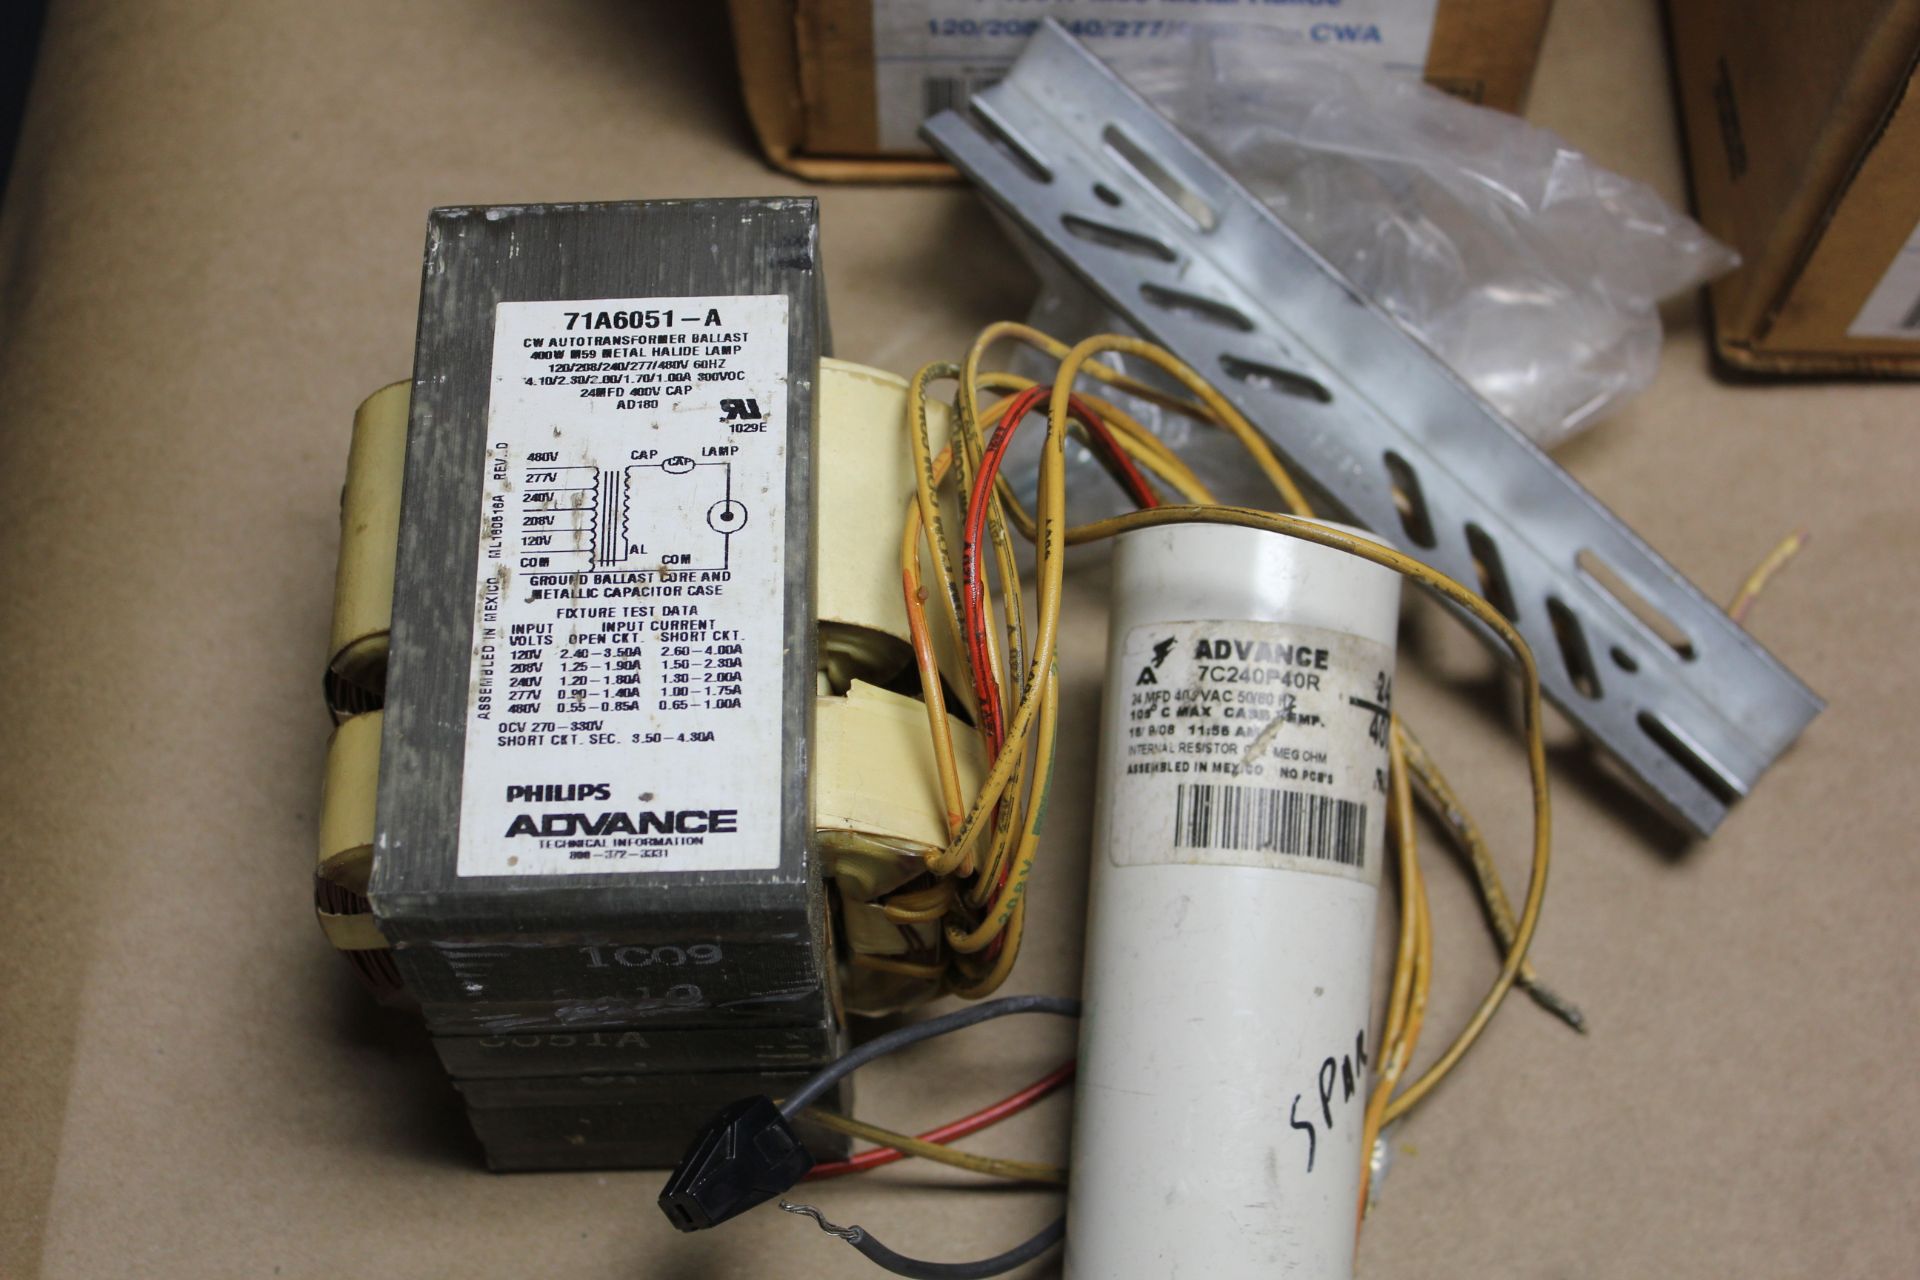 LOT OF 2 NEW PHILIPS ADVANCE CORE & COIL BALLAST KITS - Image 3 of 3